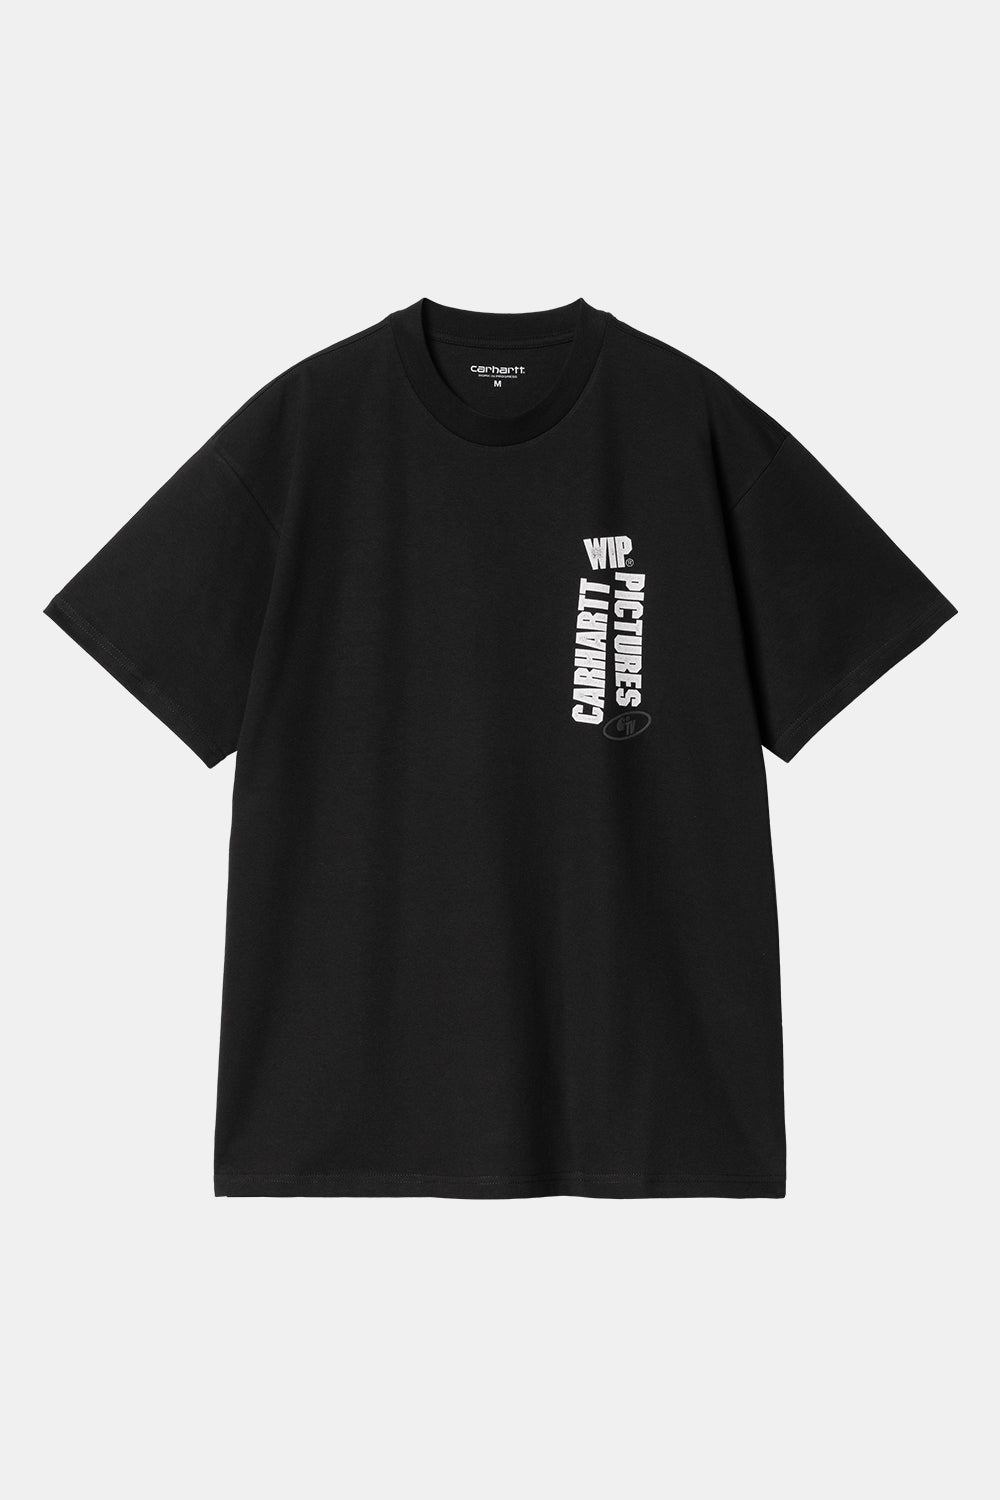 Carhartt WIP Short Sleeve Pictures T-Shirt (Black)